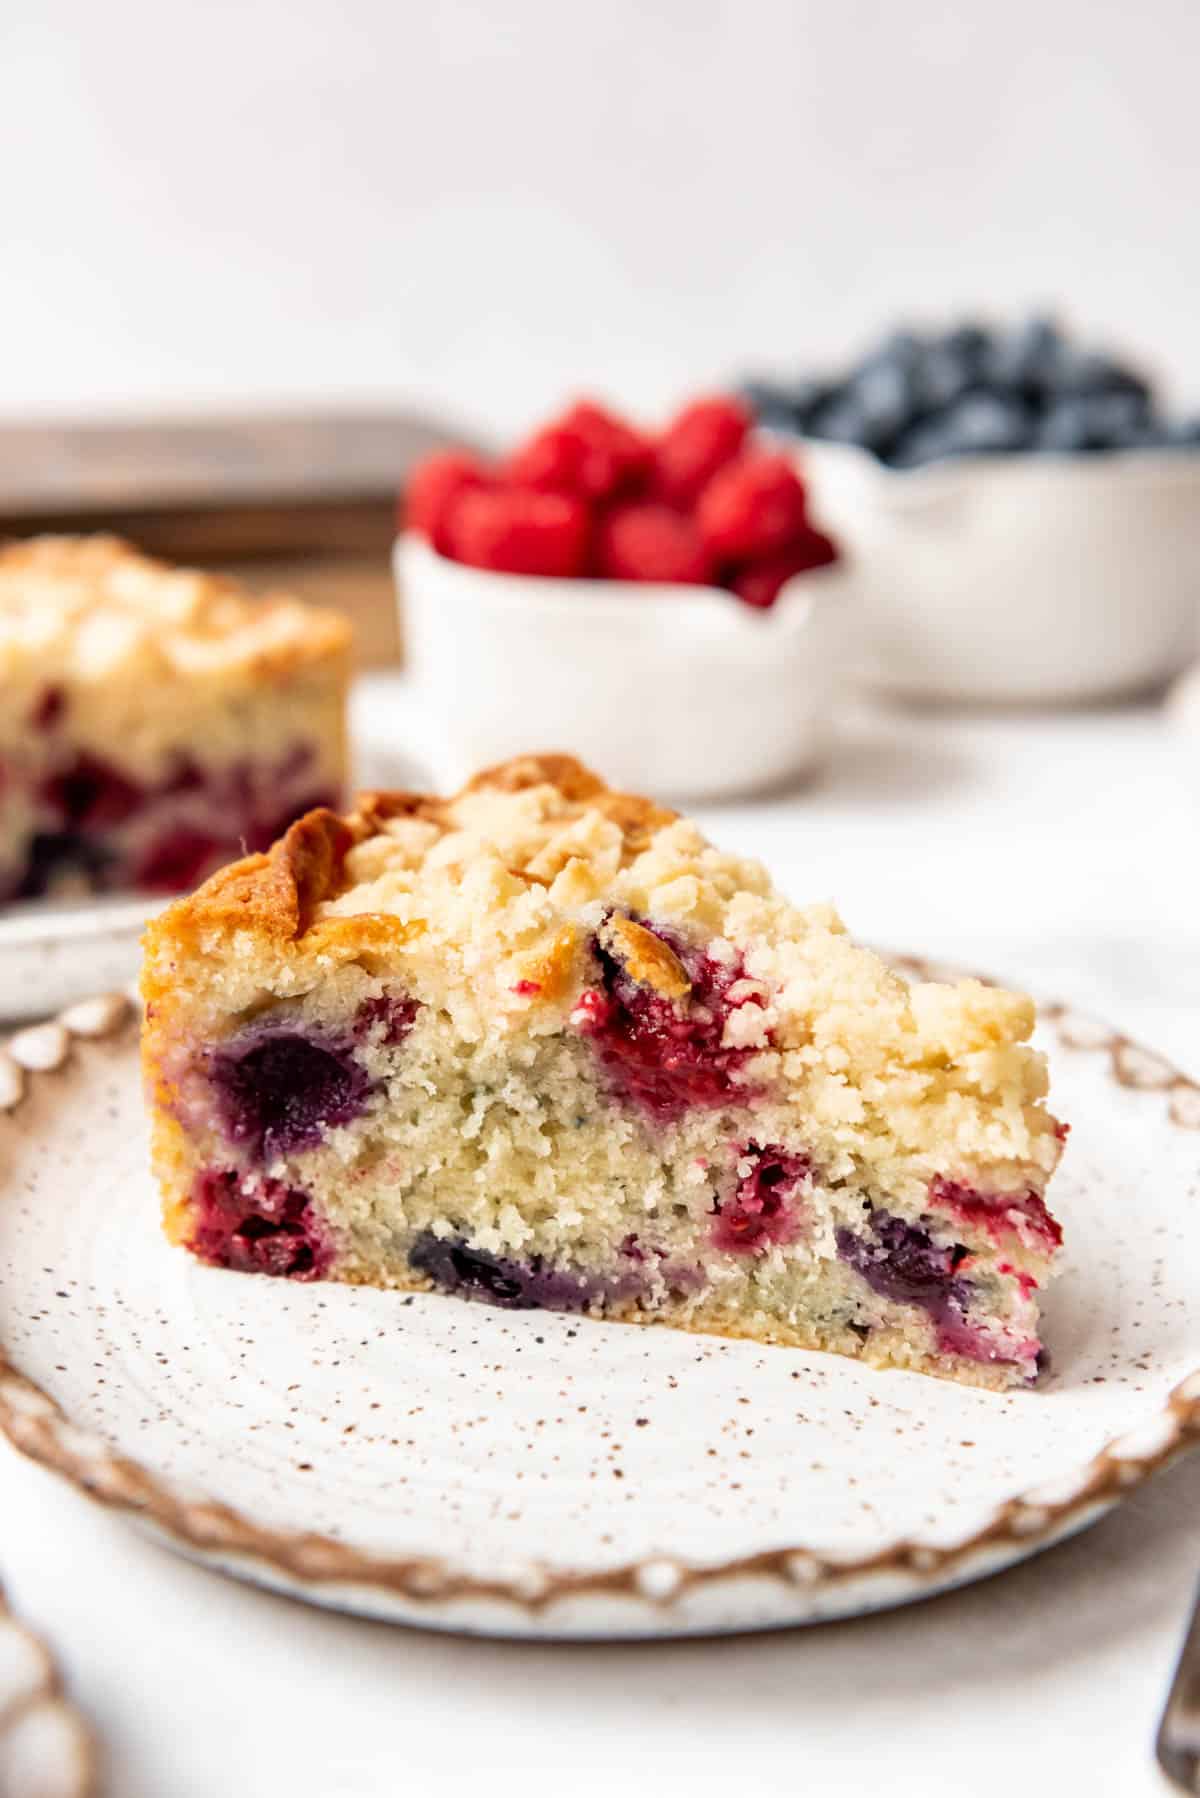 A slice of mixed berry breakfast cake on a plate.